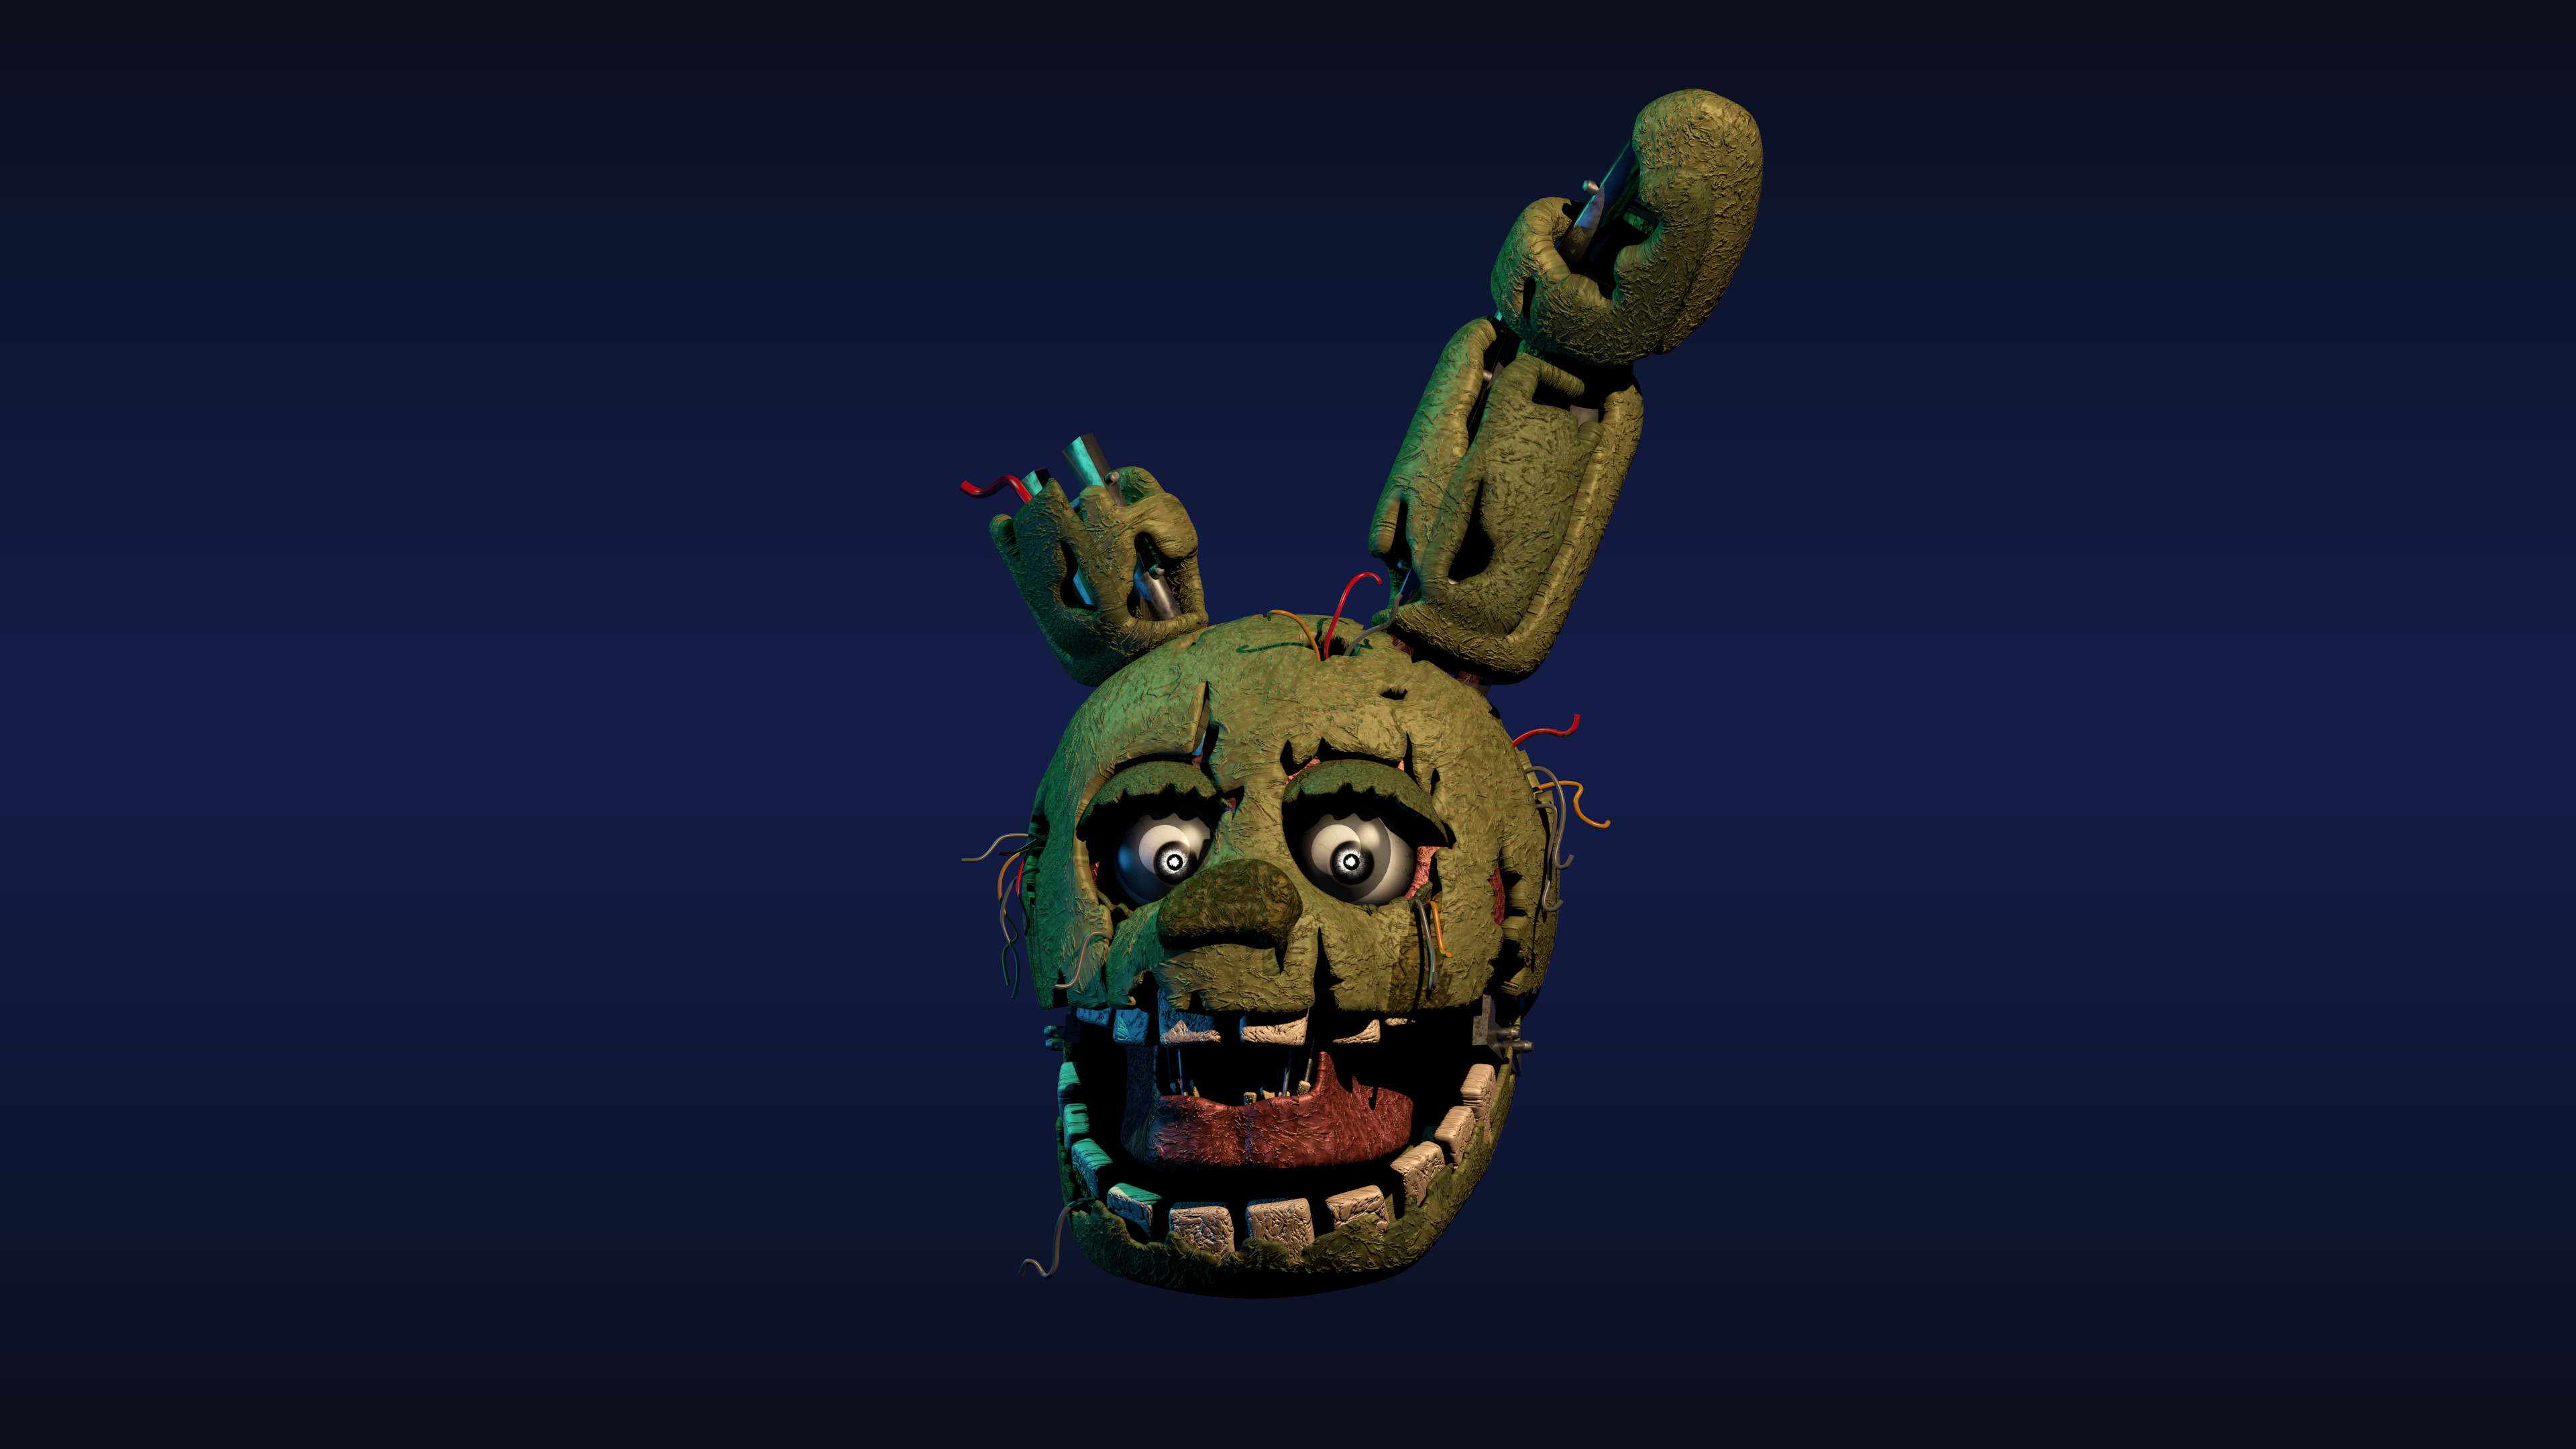 3840x2160 Springtrap Wallpaper by EverythingAnimations Springtrap Wallpaper by  EverythingAnimations